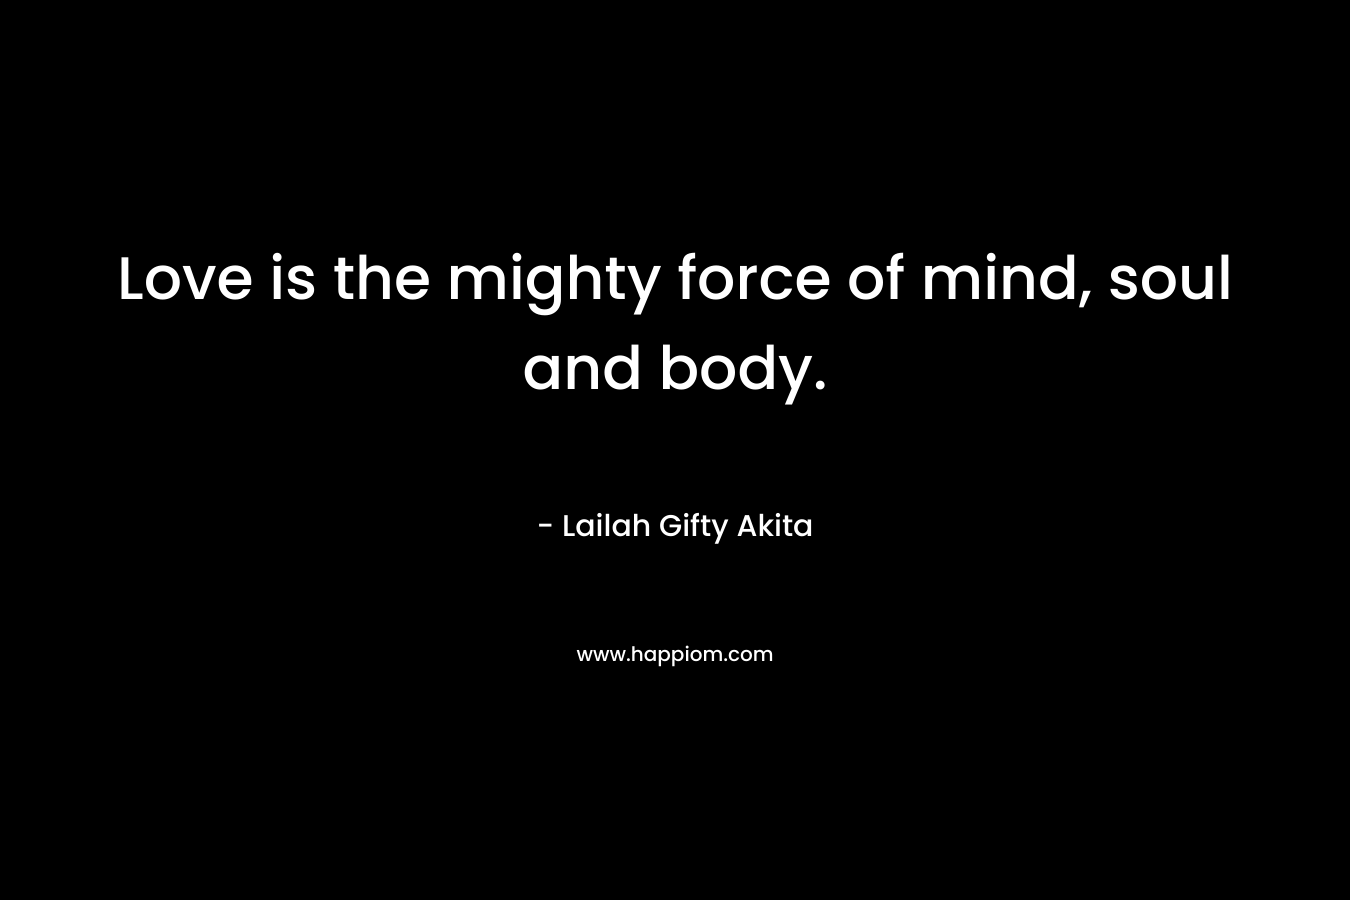 Love is the mighty force of mind, soul and body.